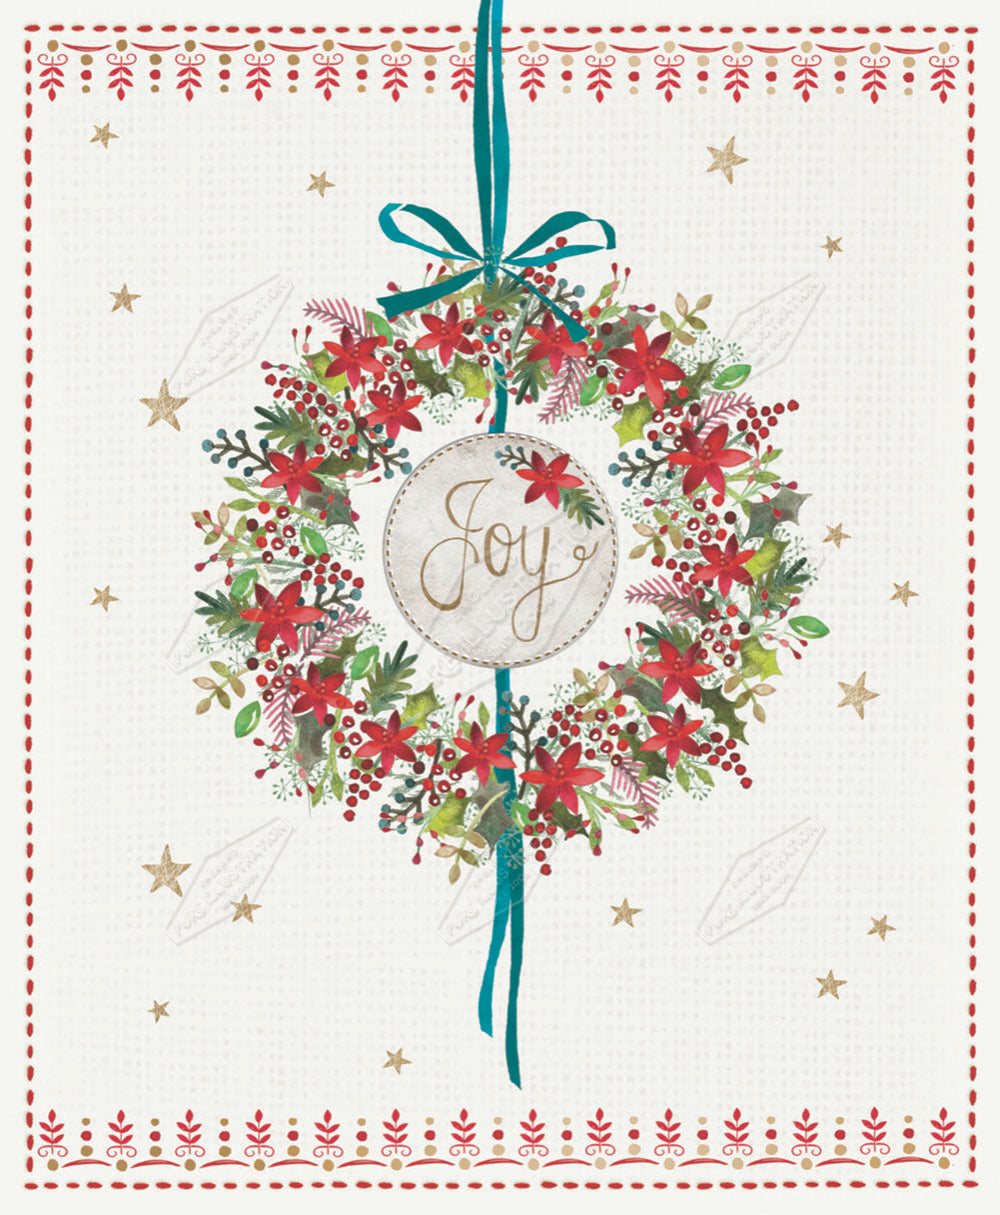 00032245KSP- Kerry Spurling is represented by Pure Art Licensing Agency - Christmas Greeting Card Design